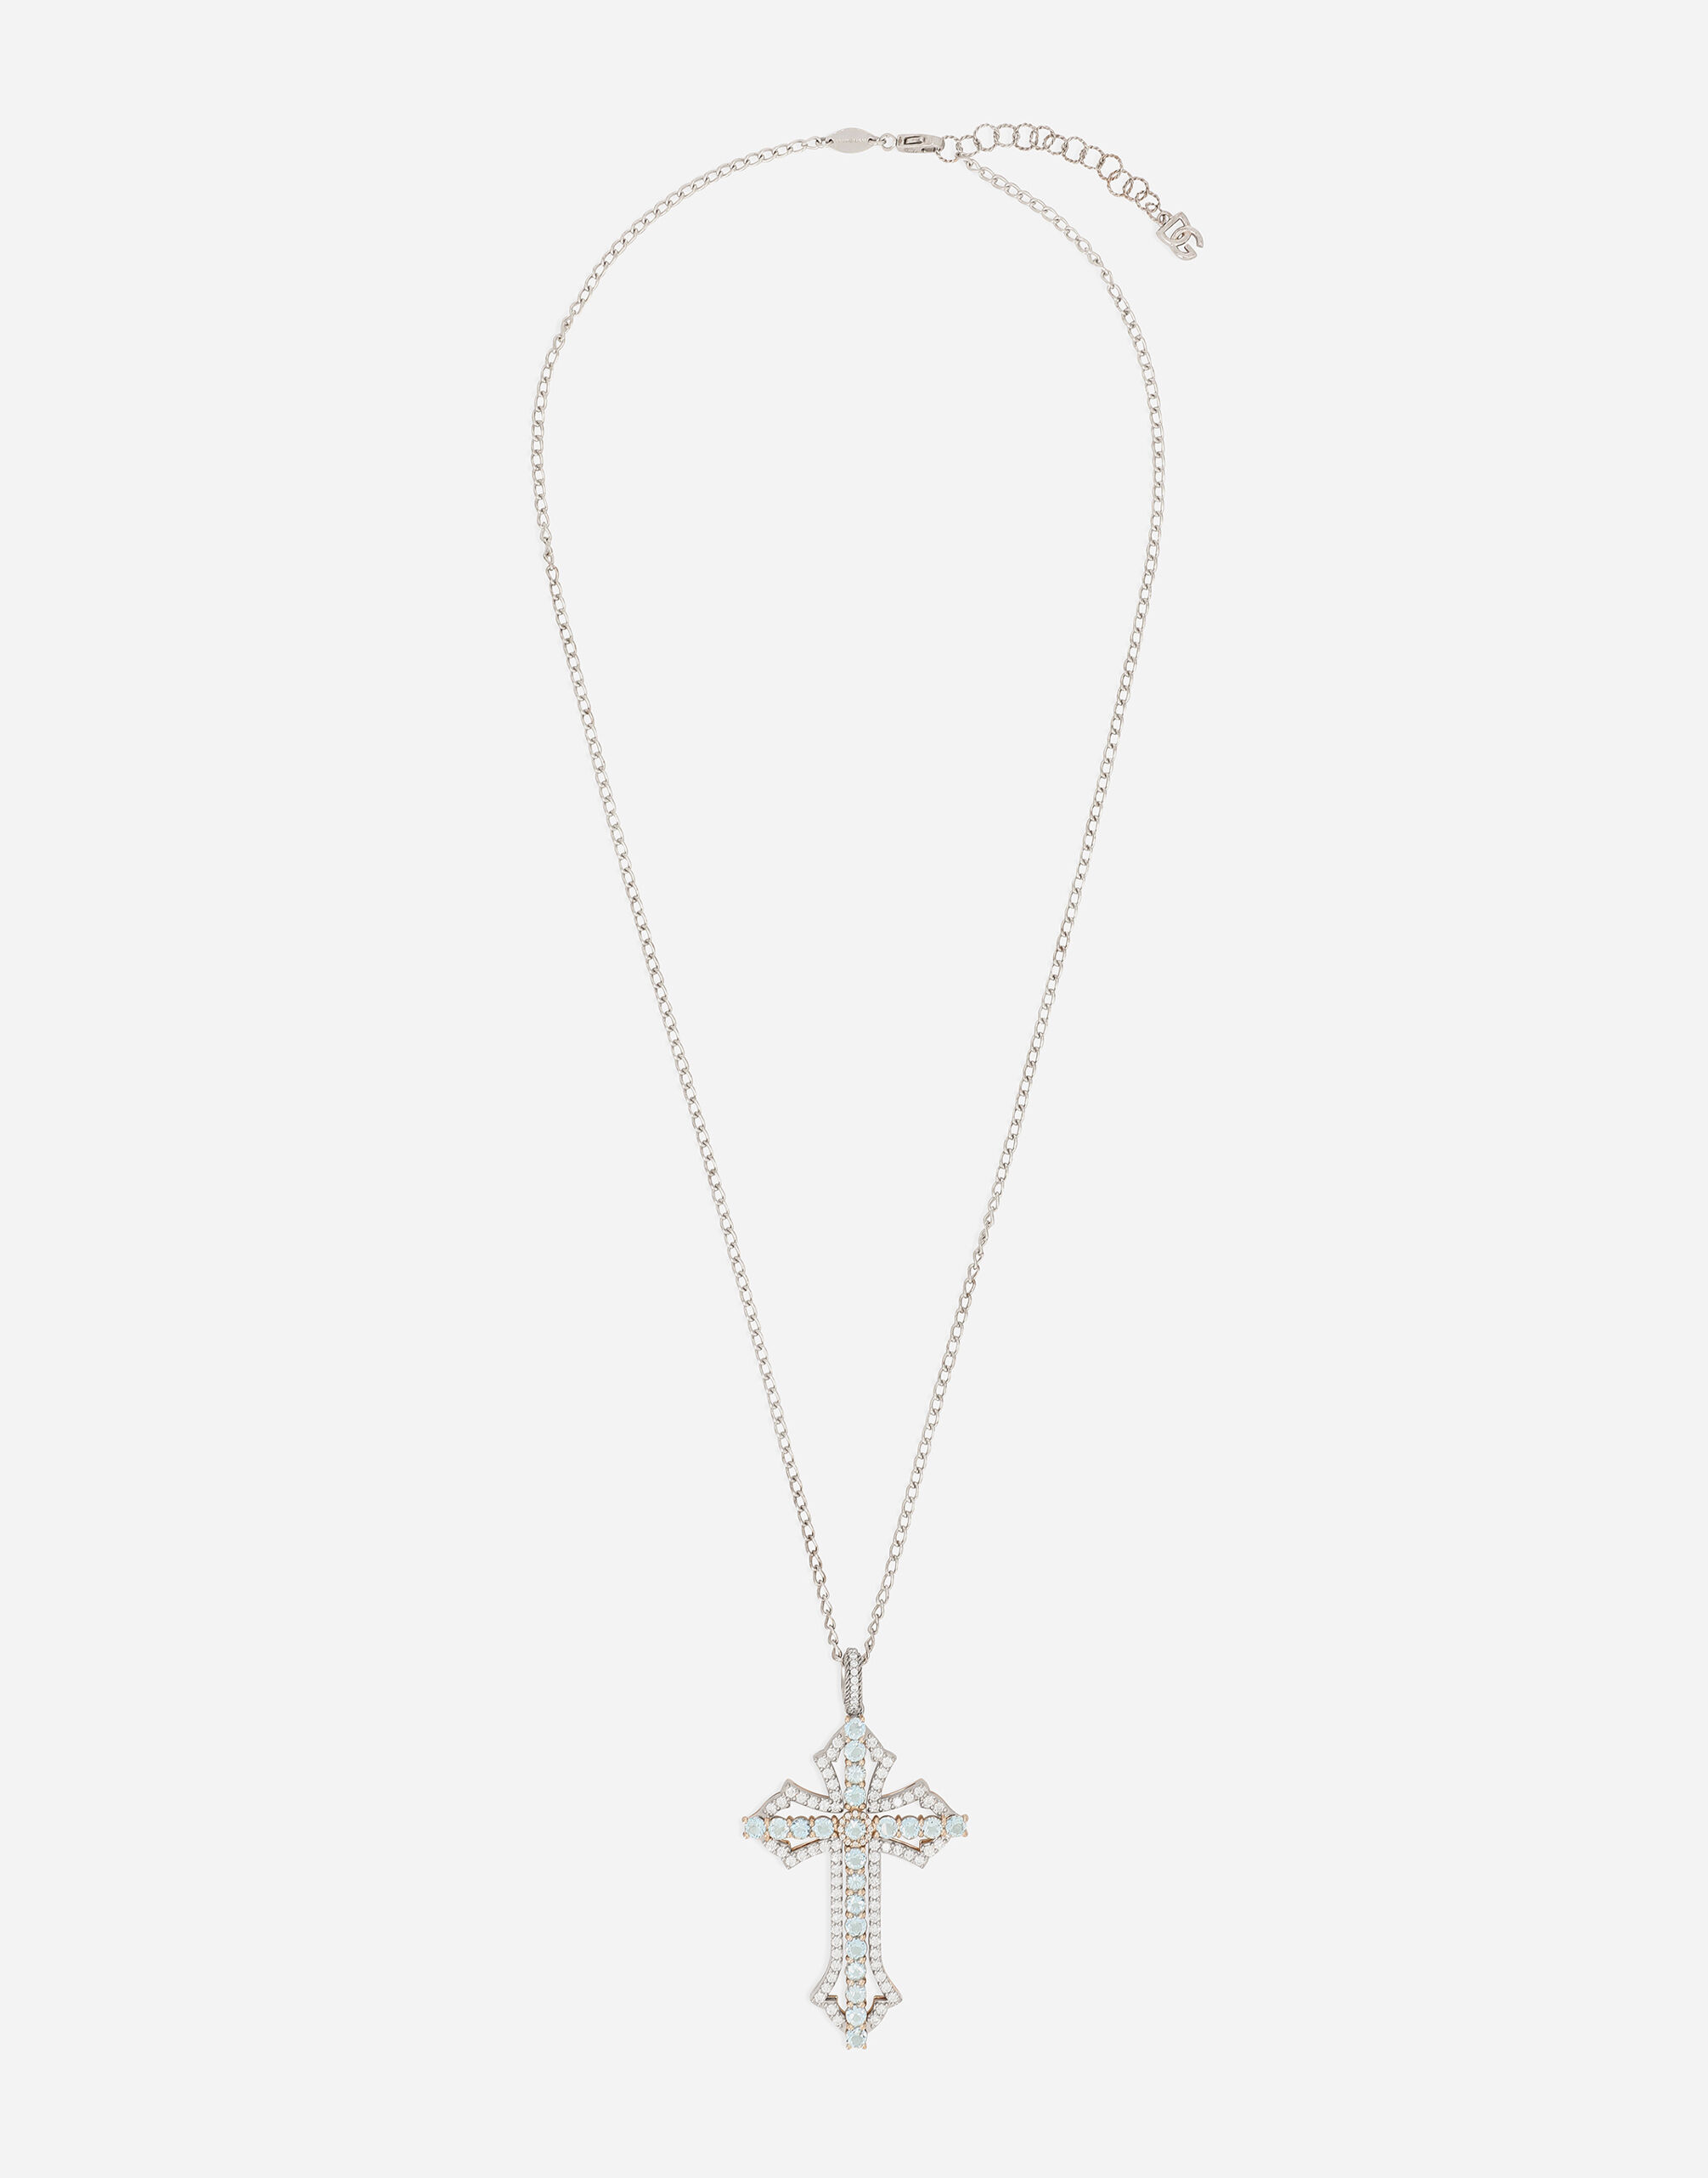 ${brand} Tradition pendant in white gold 18kt with aquamarines and diamonds ${colorDescription} ${masterID}